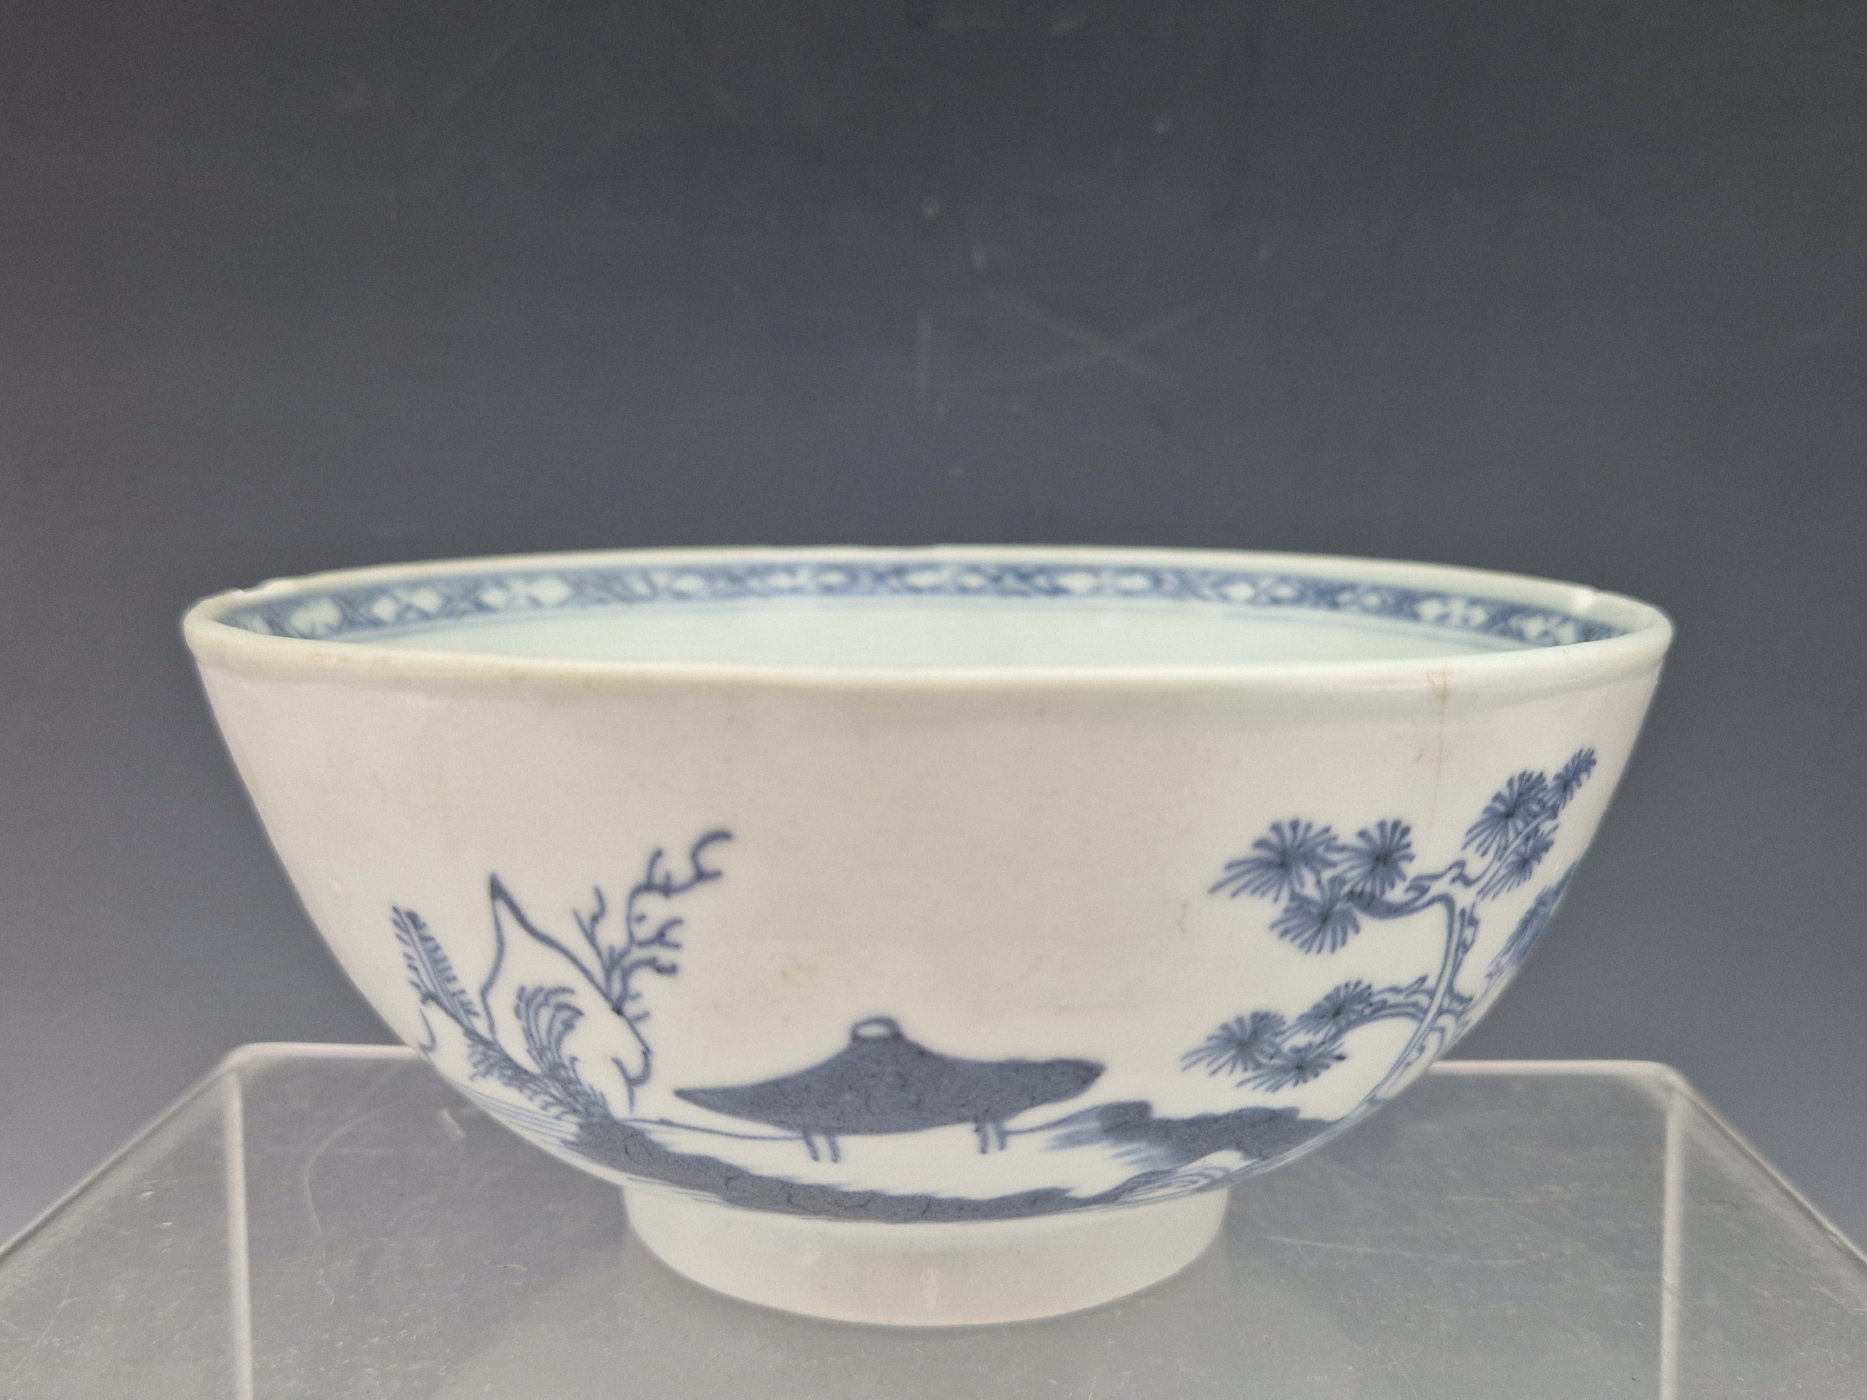 A NANKING CARGO BLUE AND WHITE BOWL, THE EXTERIOR PAINTED WITH ISLANDS, CHRISTIES LABEL FOR LOT